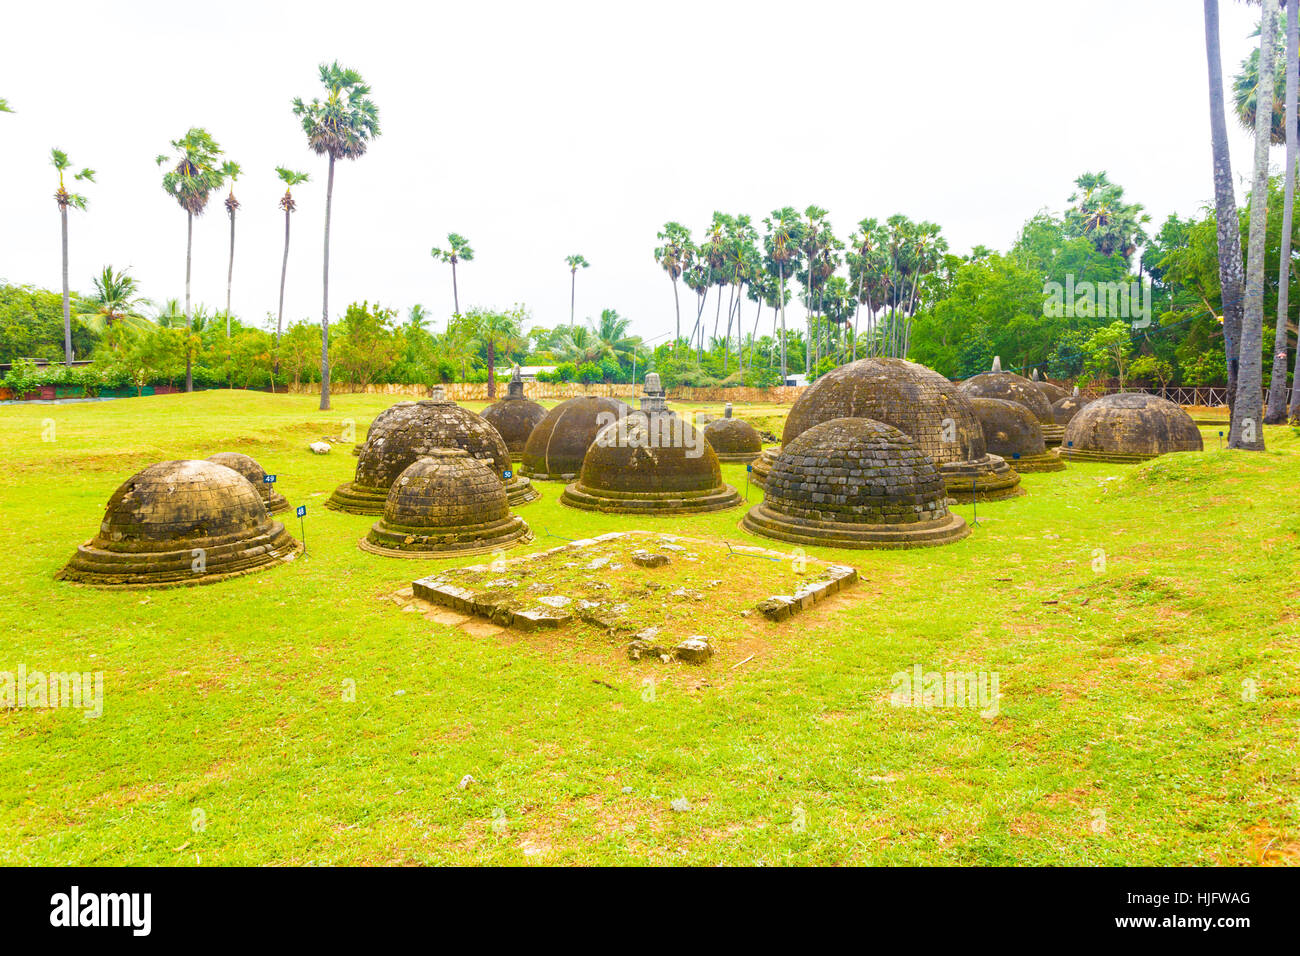 Ancient dagobas or stupas seen in middle of an archelogical site thought to be an old Kadurugoda monastery in Chunnakam, Jaffna Stock Photo